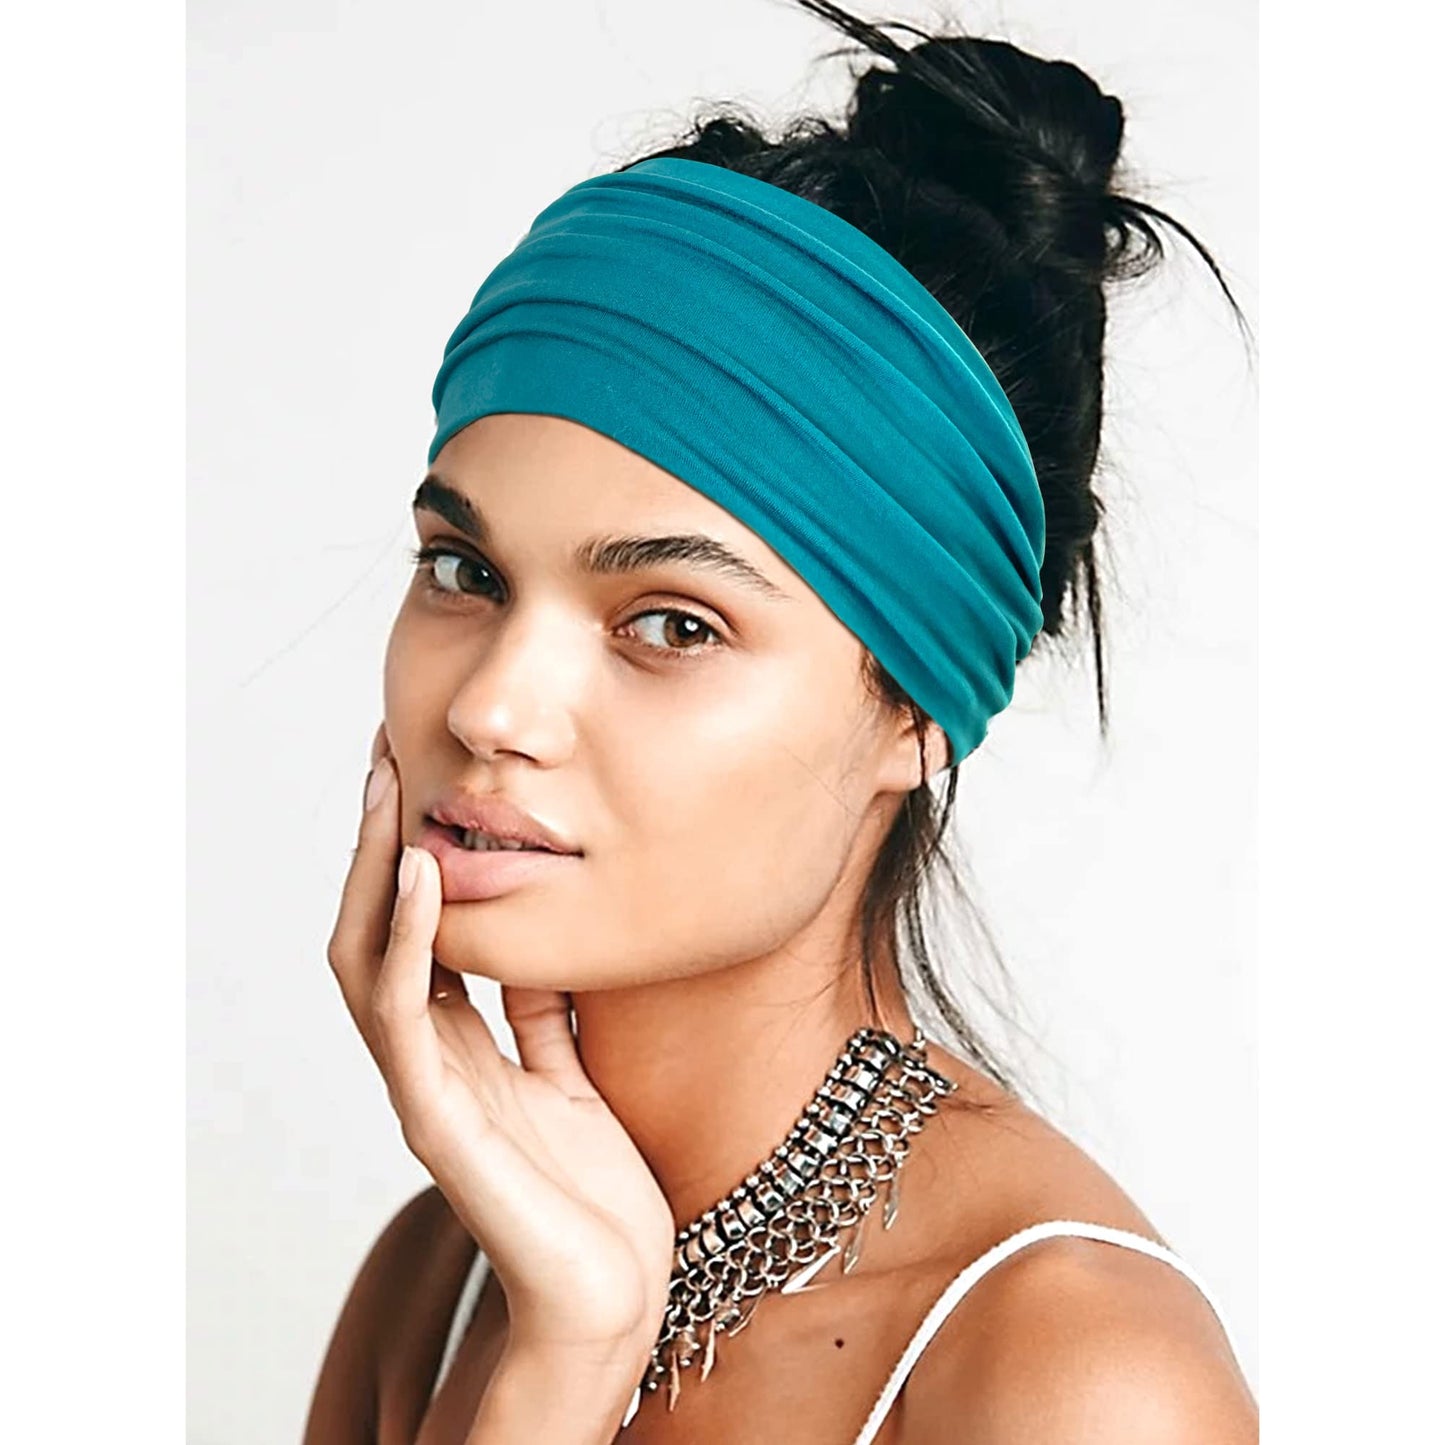 Jesries 10 PCS Women Headbands African Wide Hair Wrap Extra Turban Head Bands for Lady Large Sport Workout Stretch Non-slip Big Hair Bands